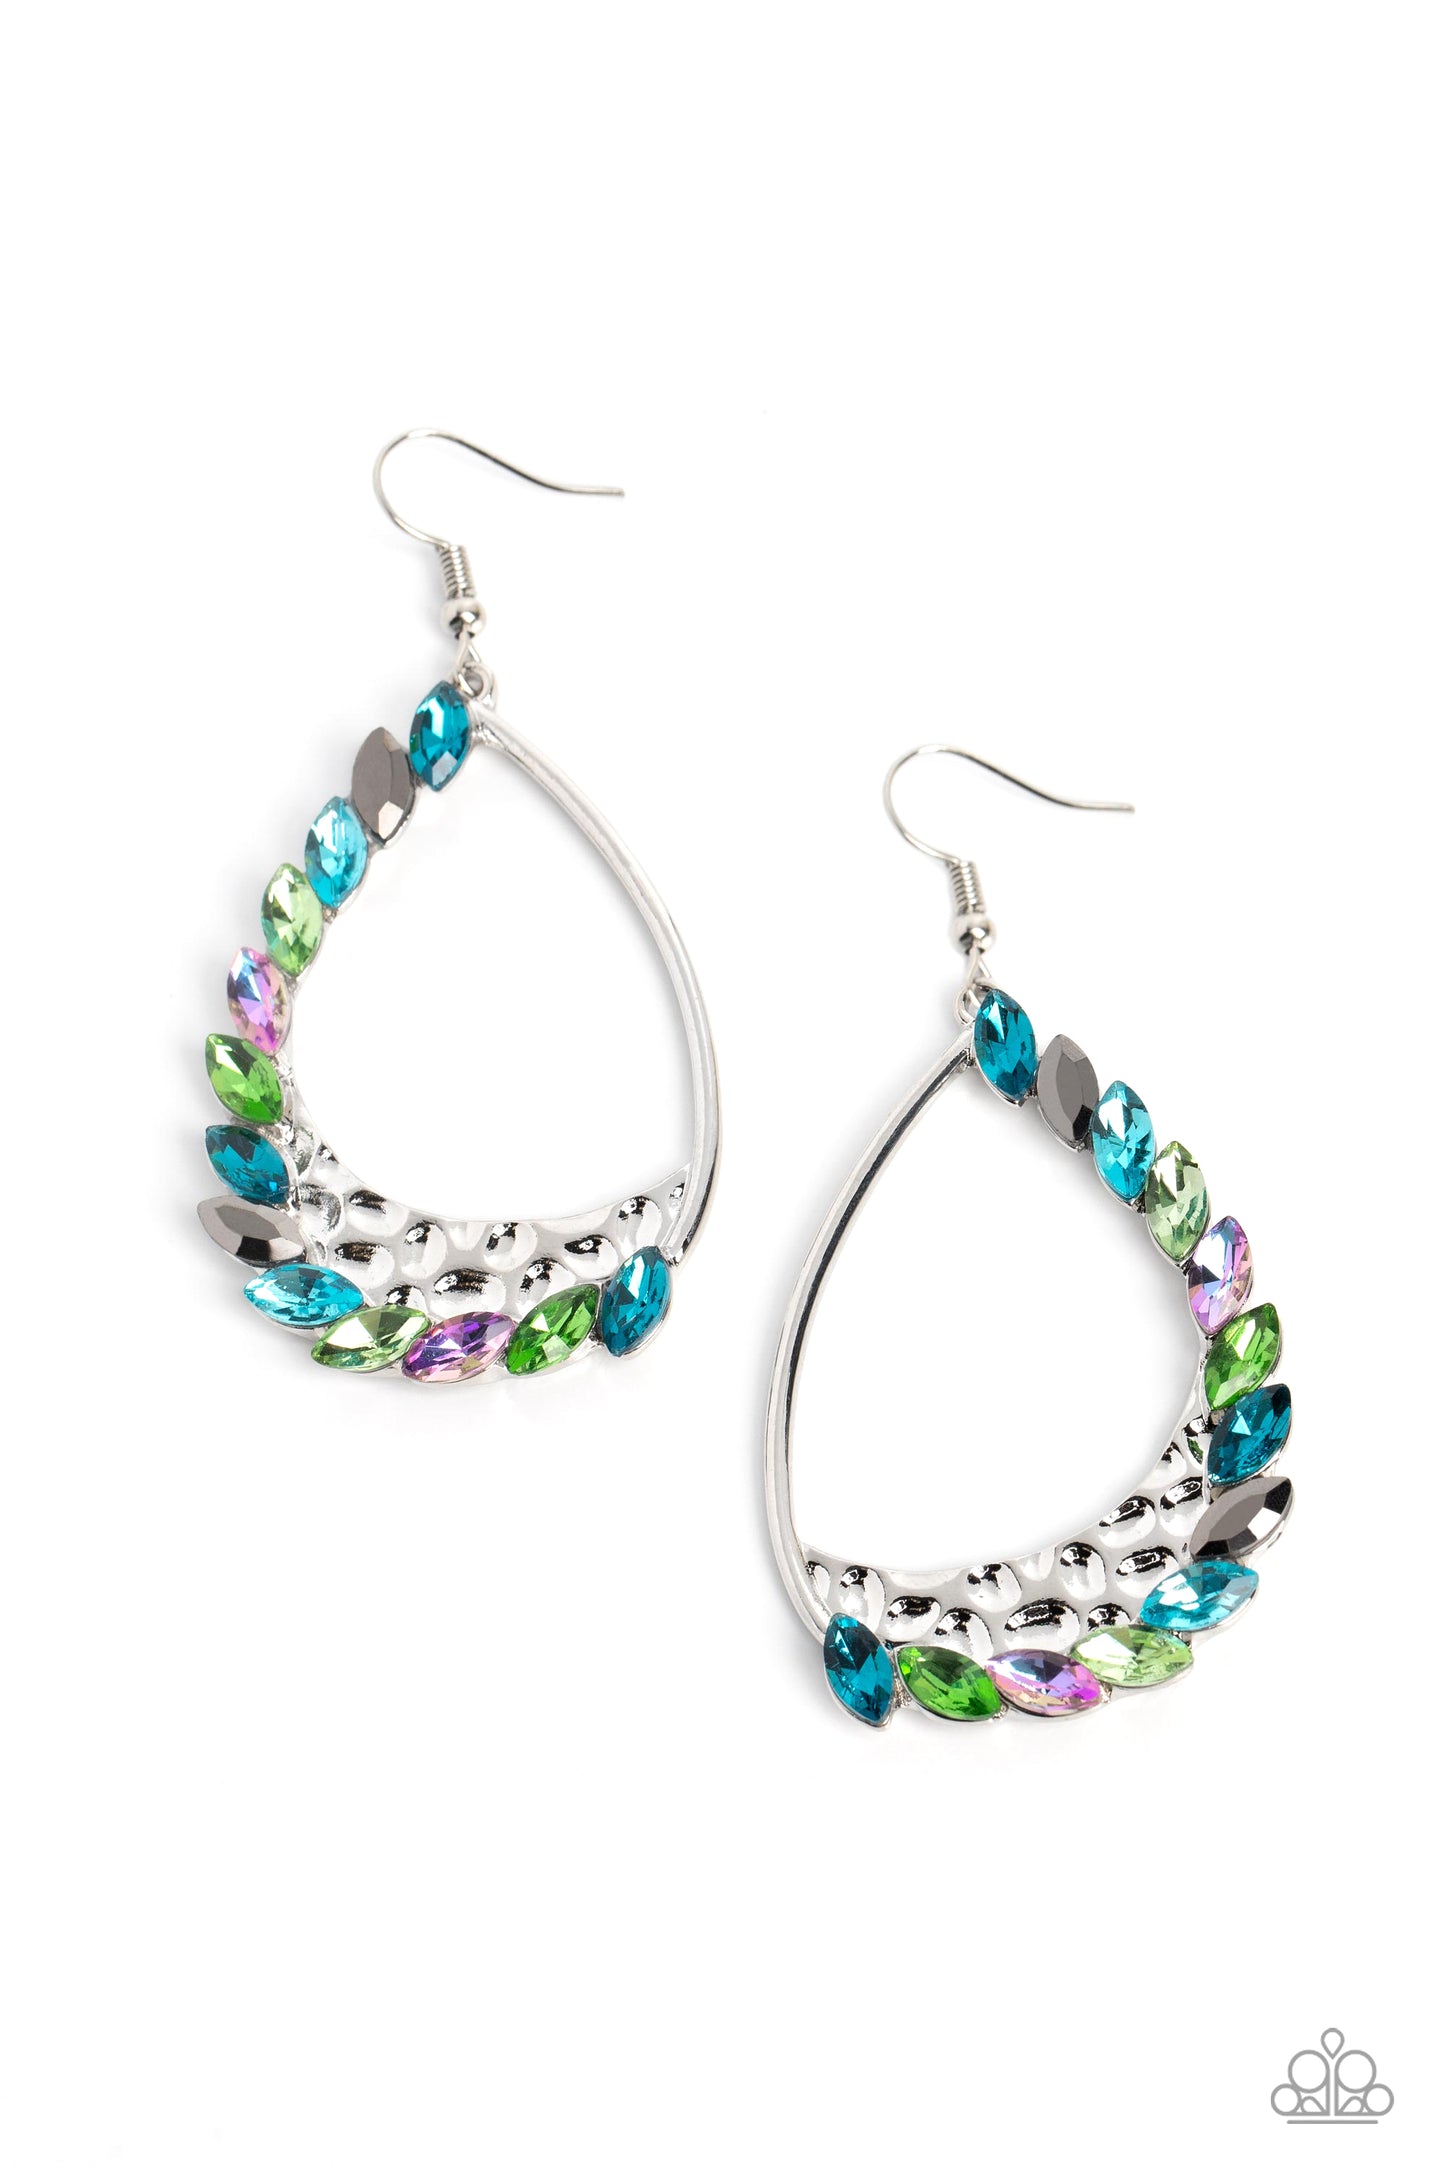 Looking Sharp Multi Earring - Paparazzi Accessories  A sharp collection of reflective blue, green, pink, light blue, light green, and hematite marquise-cut gems embellish and curve up one side of a gritty teardrop frame, creating an edgy embellishment. Creating additional grit to the design, a thick inlay of hammered silver with subtle texture curves just below the gems. Earring attaches to a standard fishhook fitting.  Sold as one pair of earrings.  P5ST-MTXX-058XX